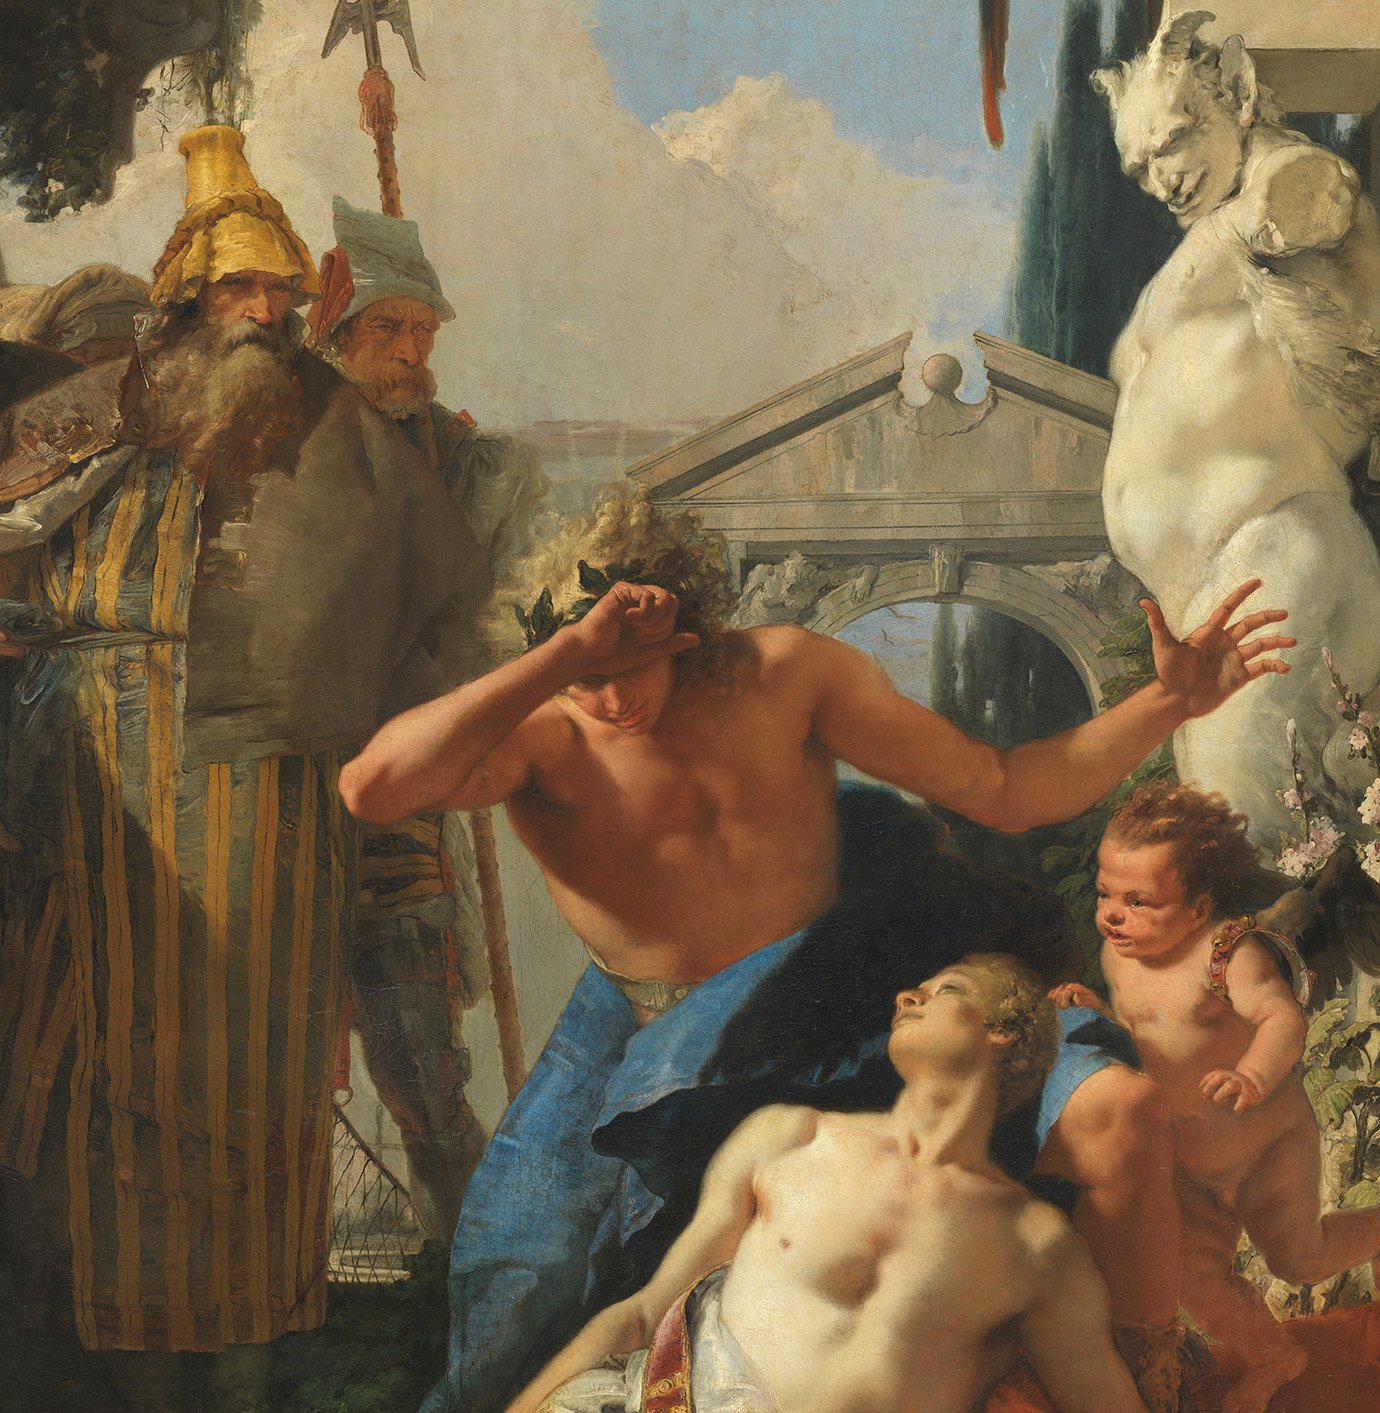 Detail of the painting "The Death of Hyacinthus" by Giambattista Tiepolo, before its restoration